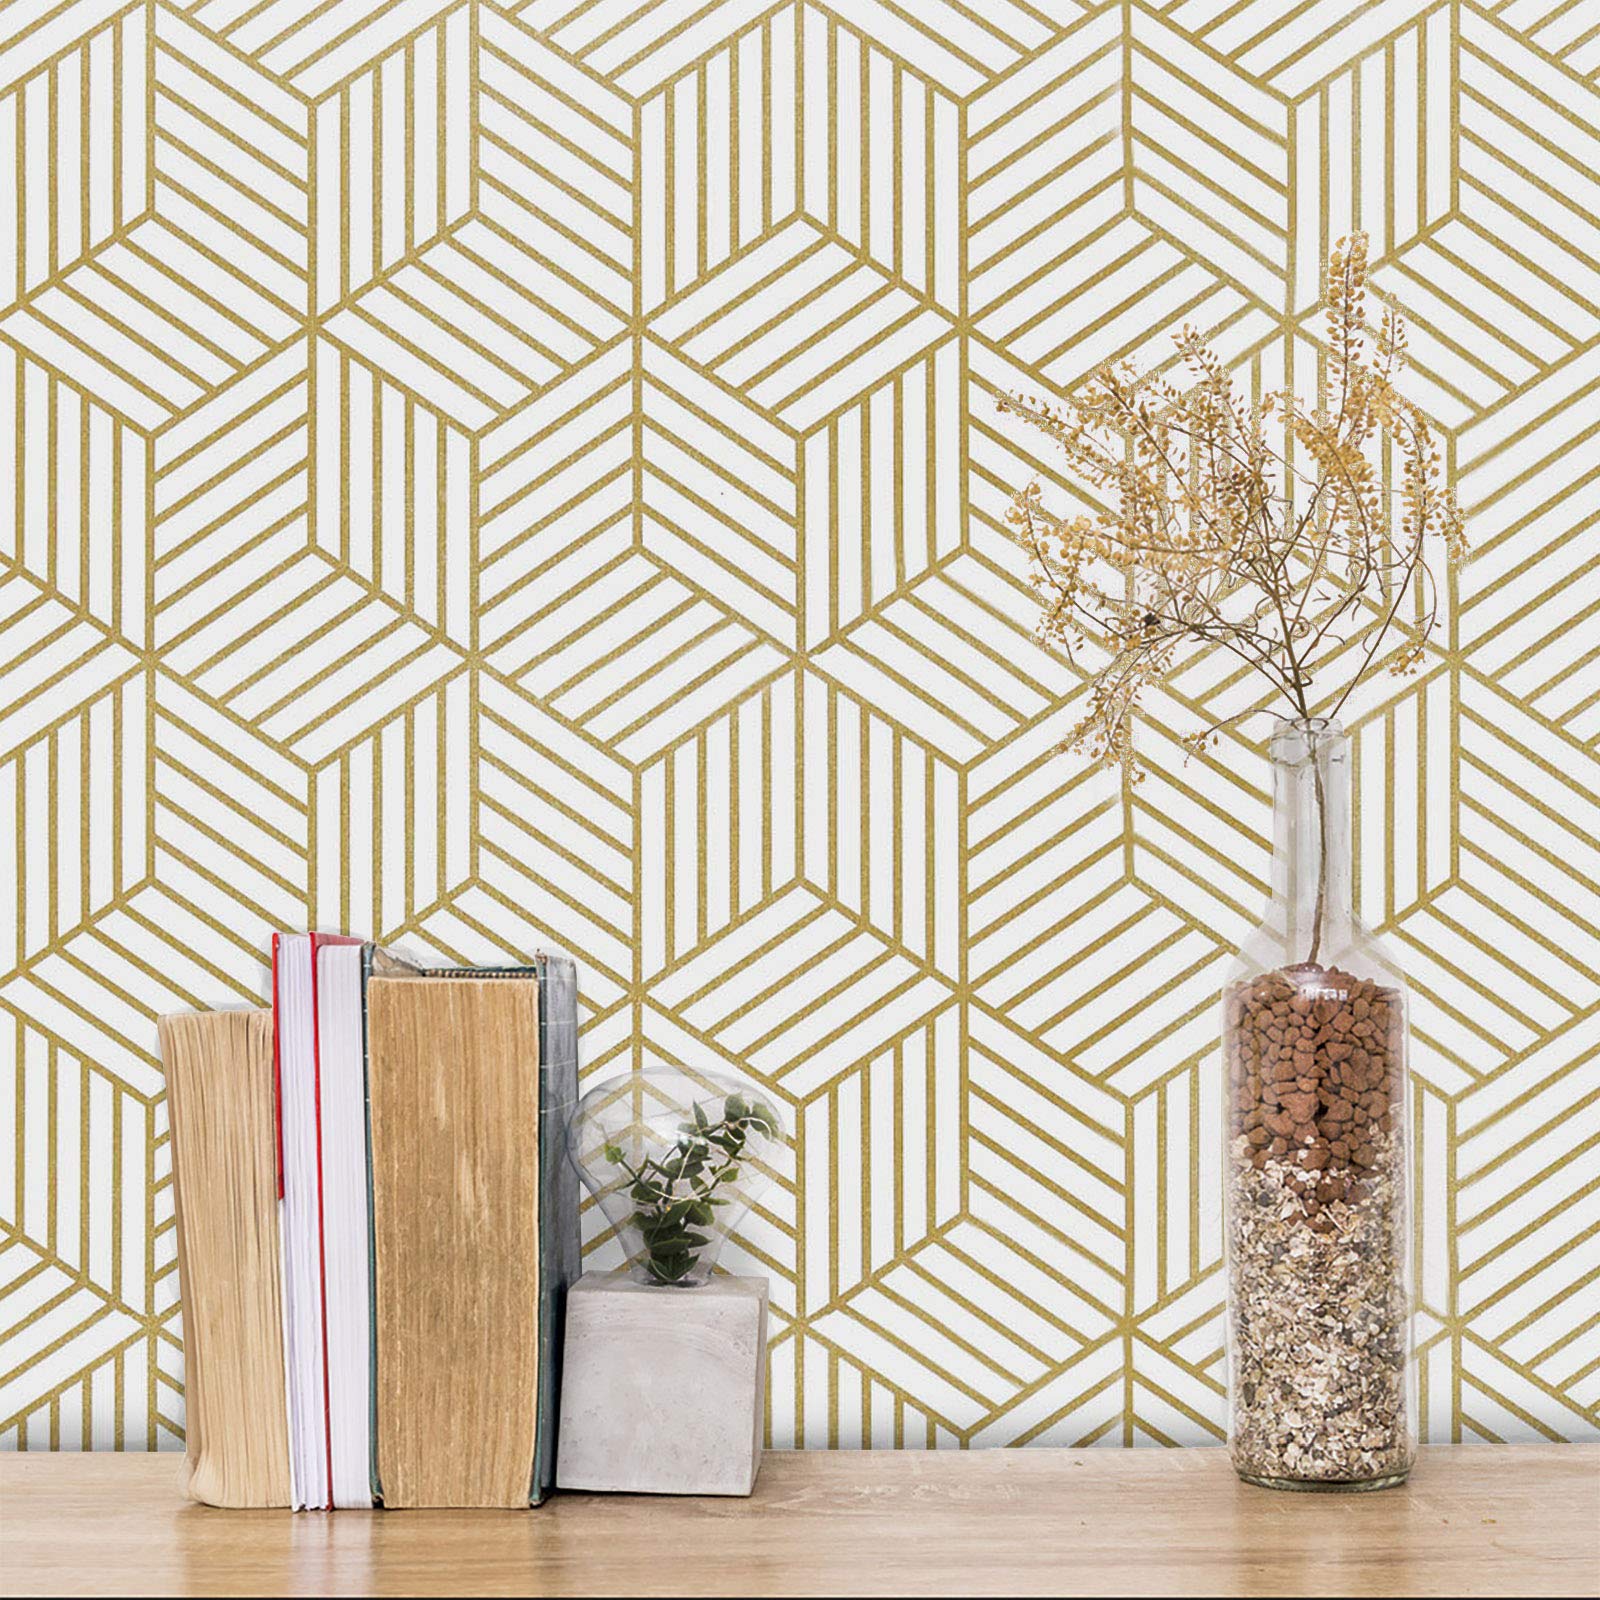 Gold and White Geometric Wallpaper Peel and Stick Hexagon Removable Self Adhesive Decor